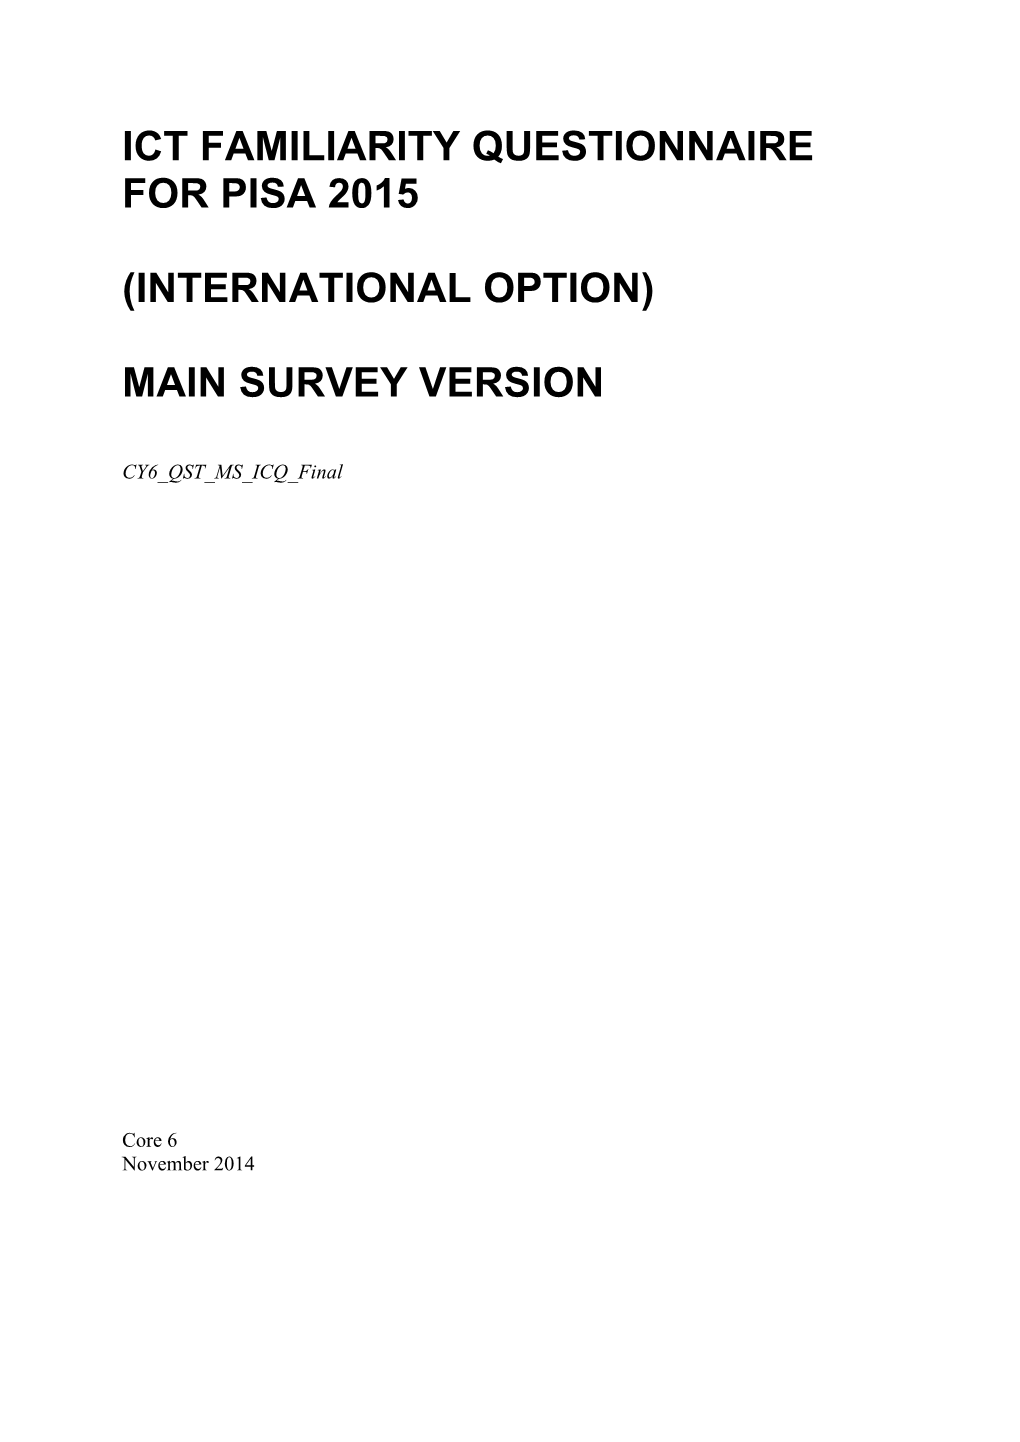 Ict Familiarity Questionnaire for Pisa 2015 (International Option)